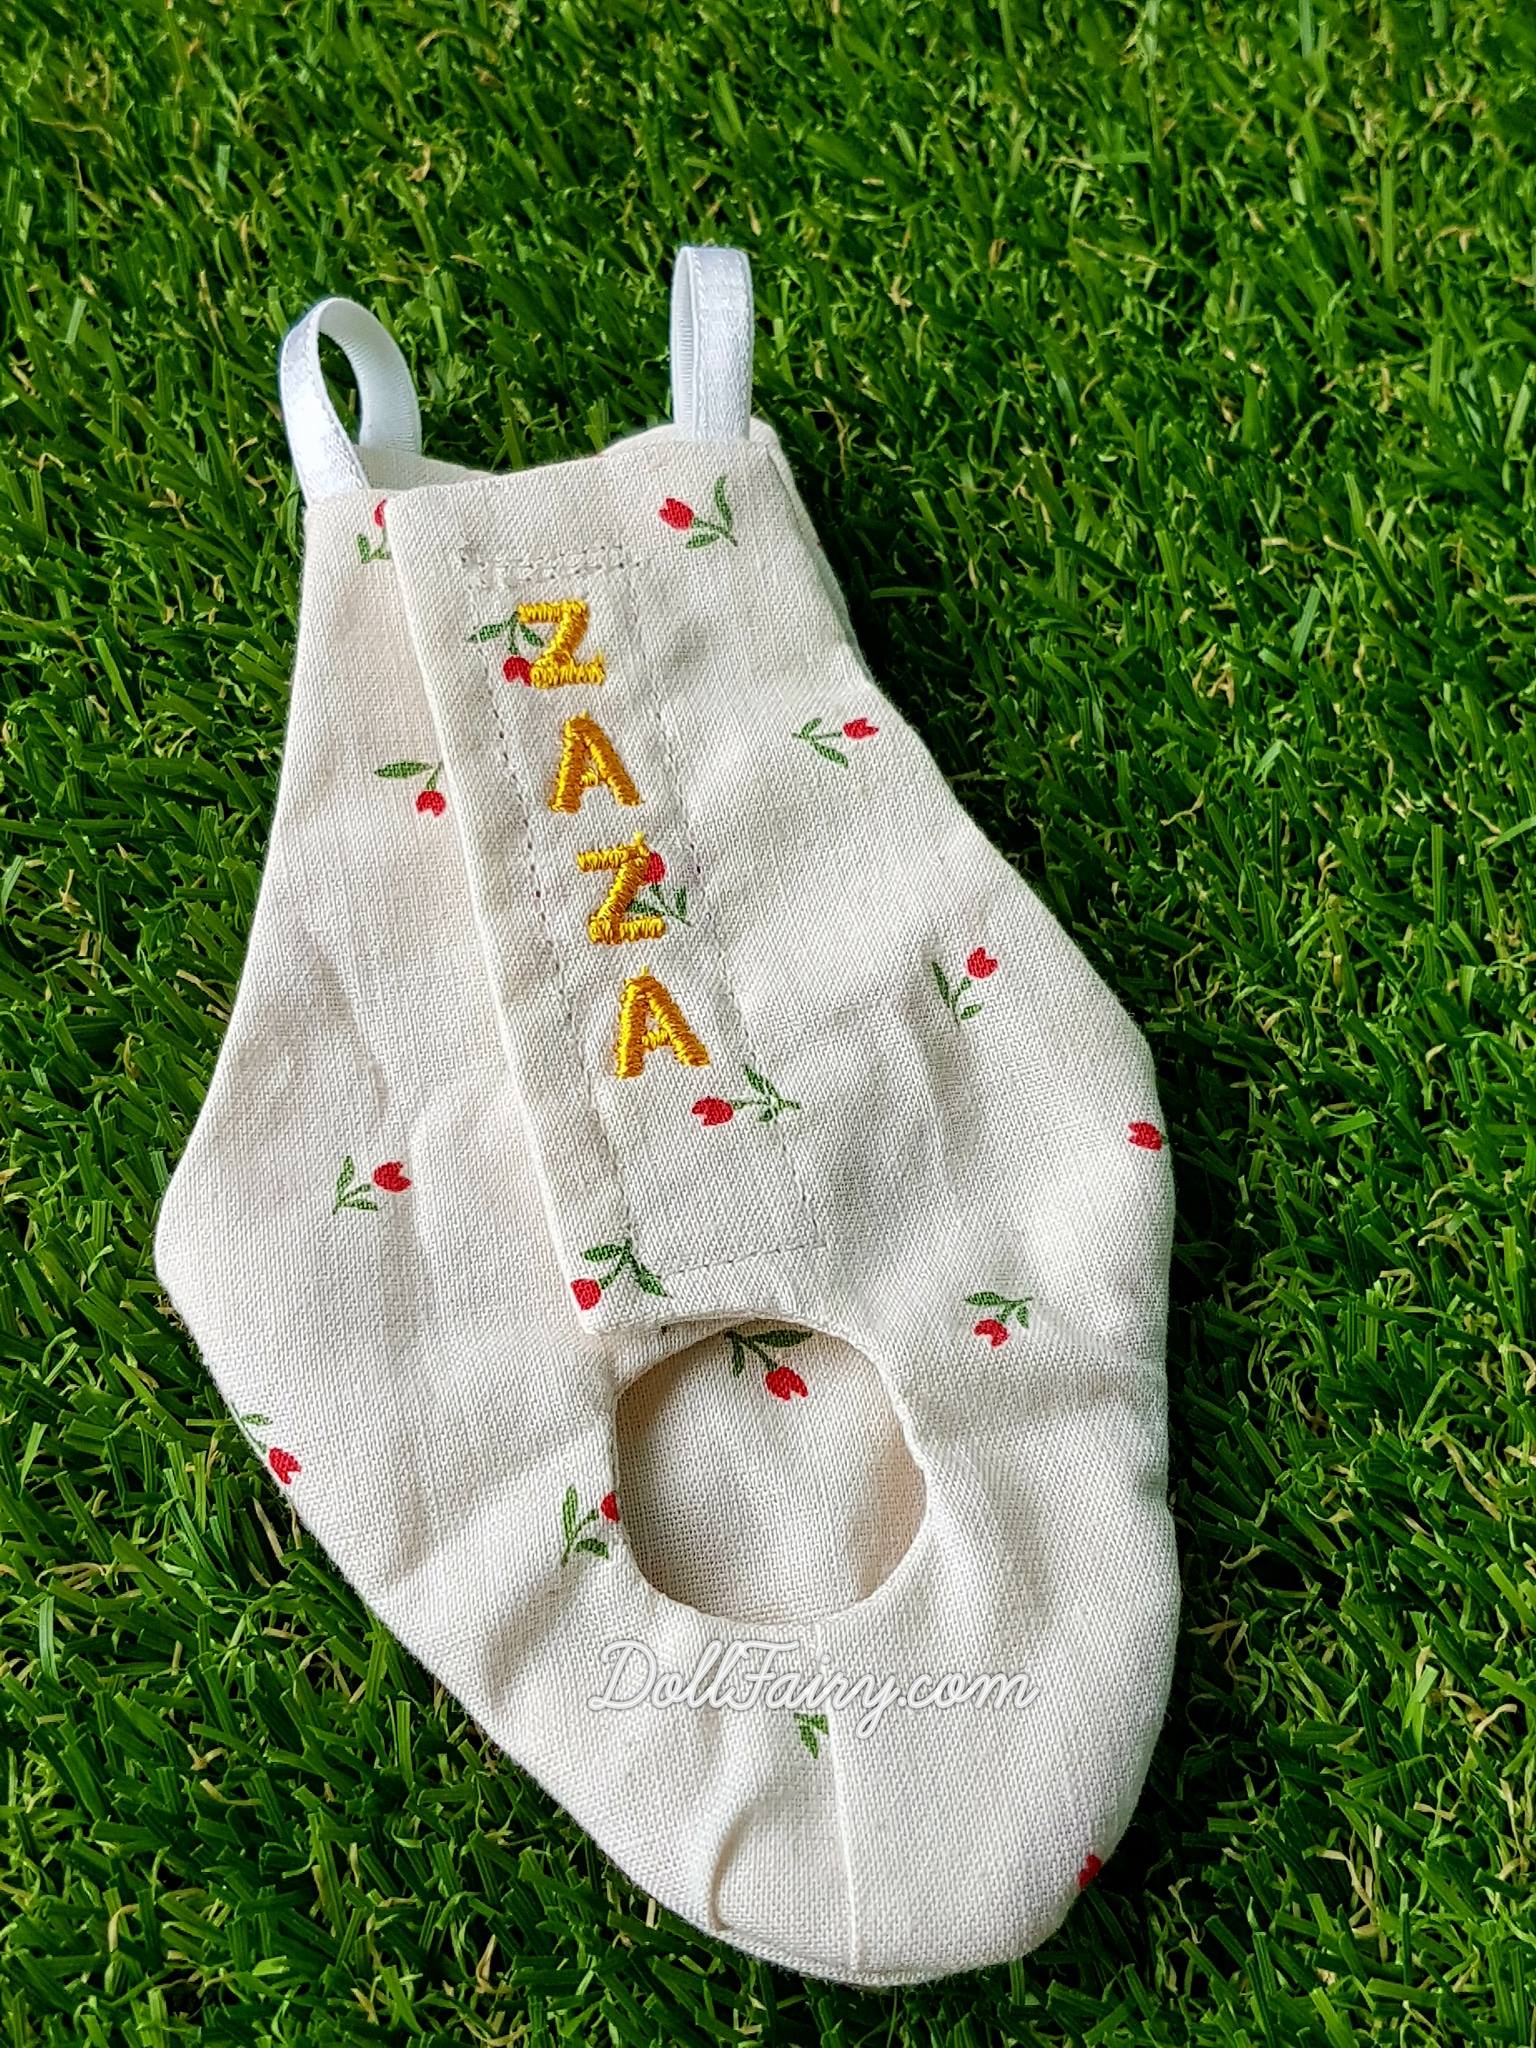 Zaza also has a sweet red tulip flight diaper suit, with a yellow rose Oriental knot.